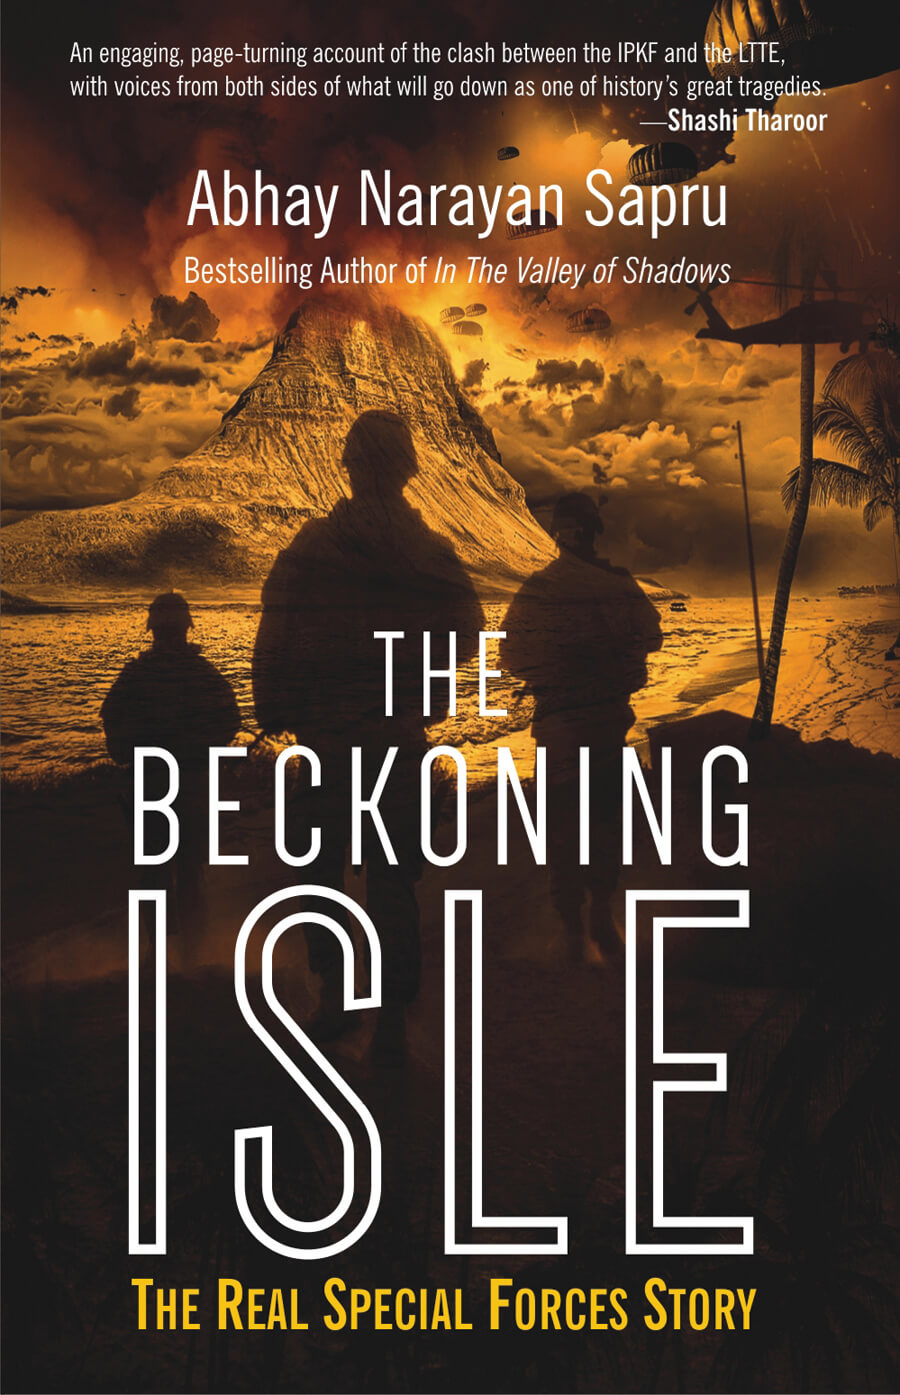 The Beckoning Isle: The Real Special Forces Story